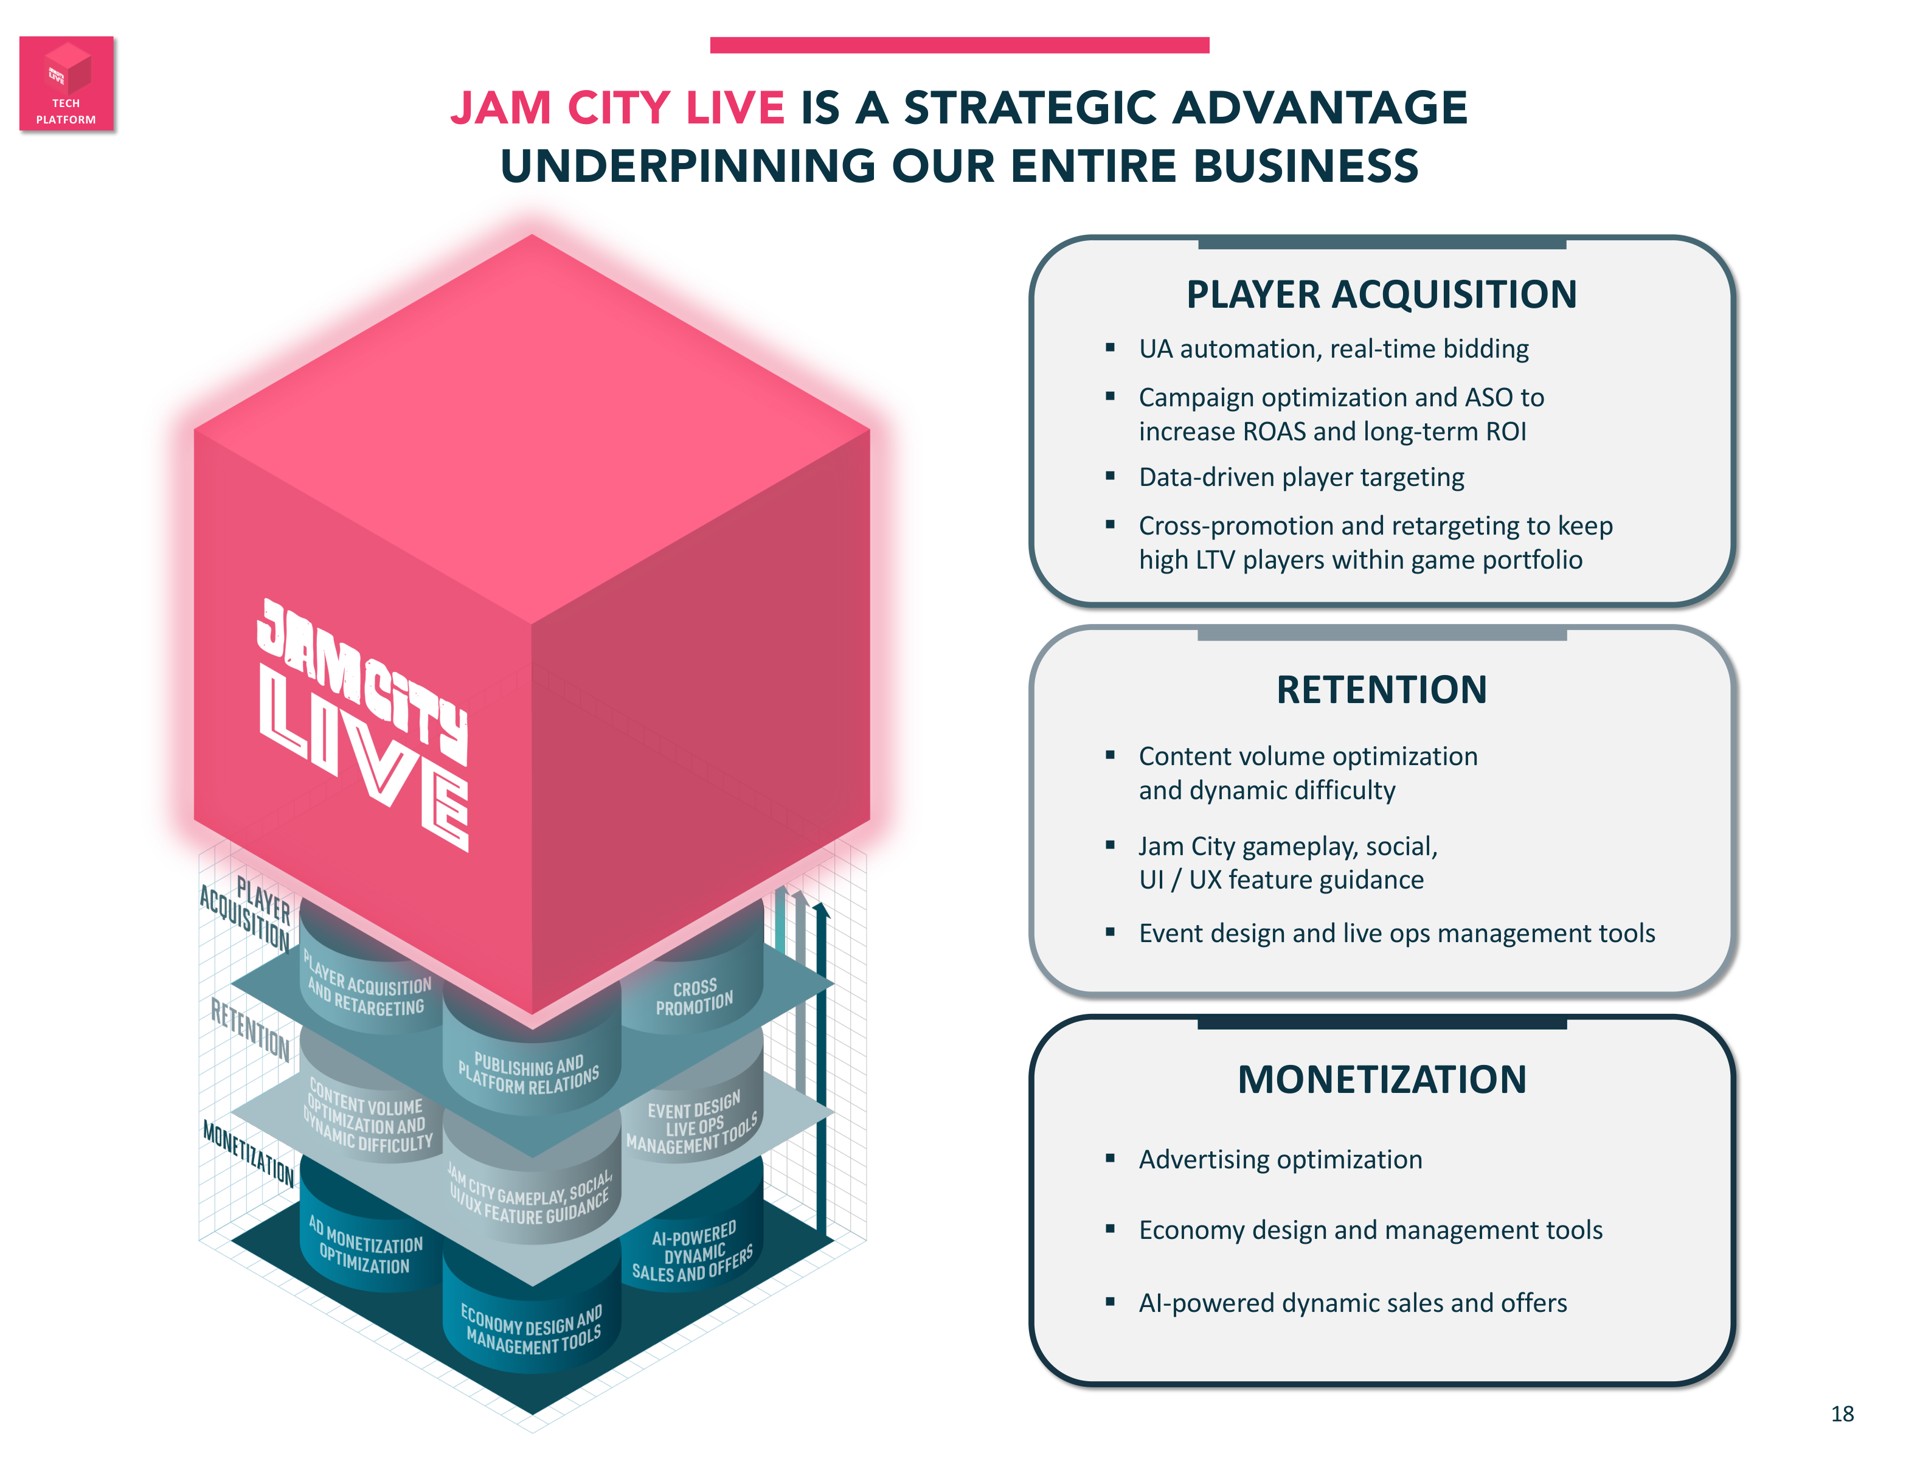 jam city live is a strategic advantage underpinning our entire business player acquisition real time bidding campaign optimization and to increase and long term roi data driven player targeting cross promotion and to keep high players within game portfolio retention content volume optimization and dynamic difficulty jam city social feature guidance event design and live management tools monetization advertising optimization economy design and management tools powered dynamic sales and offers on cat | Jam City